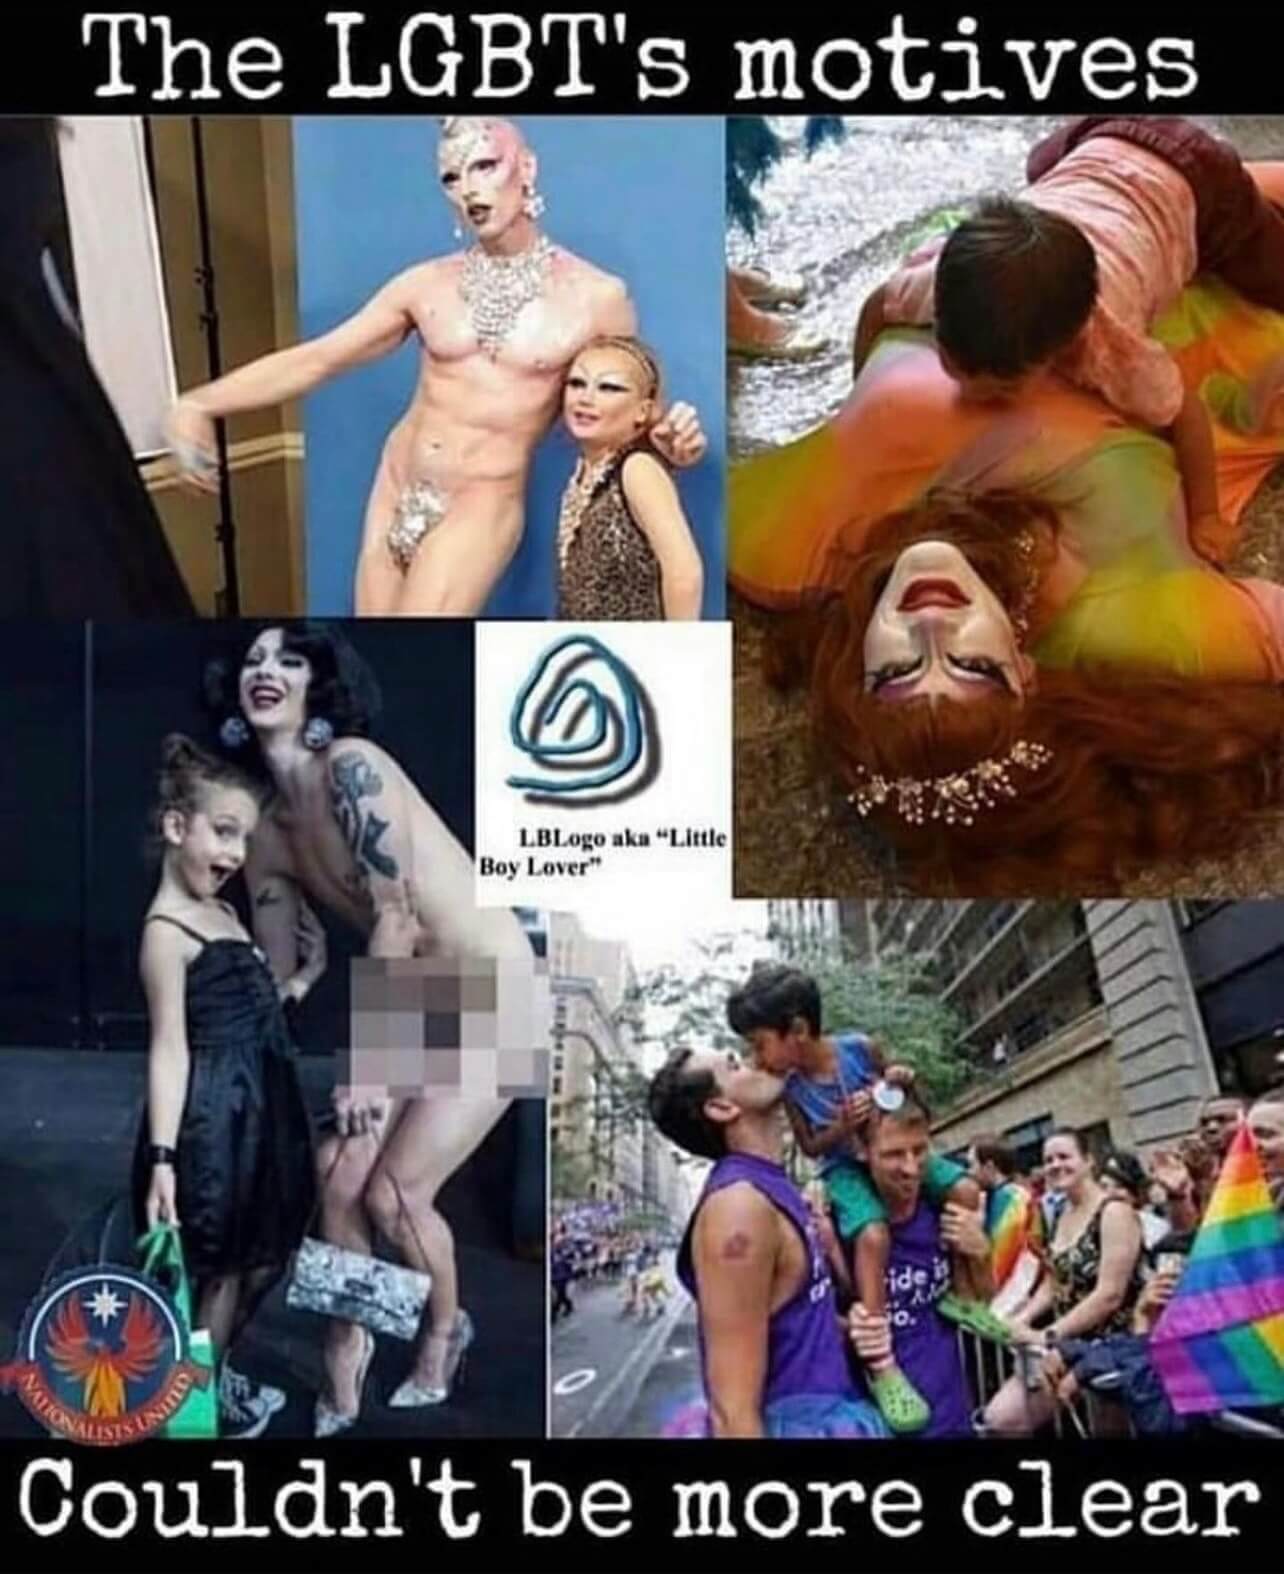 Social media collage post of five images. The top left and bottom left images show nearly nude drag performers each posing with a young fan. The top right photo shows Carla Rossi on her back on the floor of the library, wearing a red wig and yellow and pink striped gown, smiling at the camera, with a young child lying face down on her stomach and chest. The bottom right shows a street scene of a pride parade, where a man is giving a kiss to a boy who is perched on the shoulders of another man while onlookers smile. The central image is a hand drawn @ symbol accompanied by the phrase, "LBLogo aka 'Little Boy Lover'" The text at the top of the collage reads, "The LGBT's motives," and the text at the bottom of the collage reads, "Couldn't be more clear."